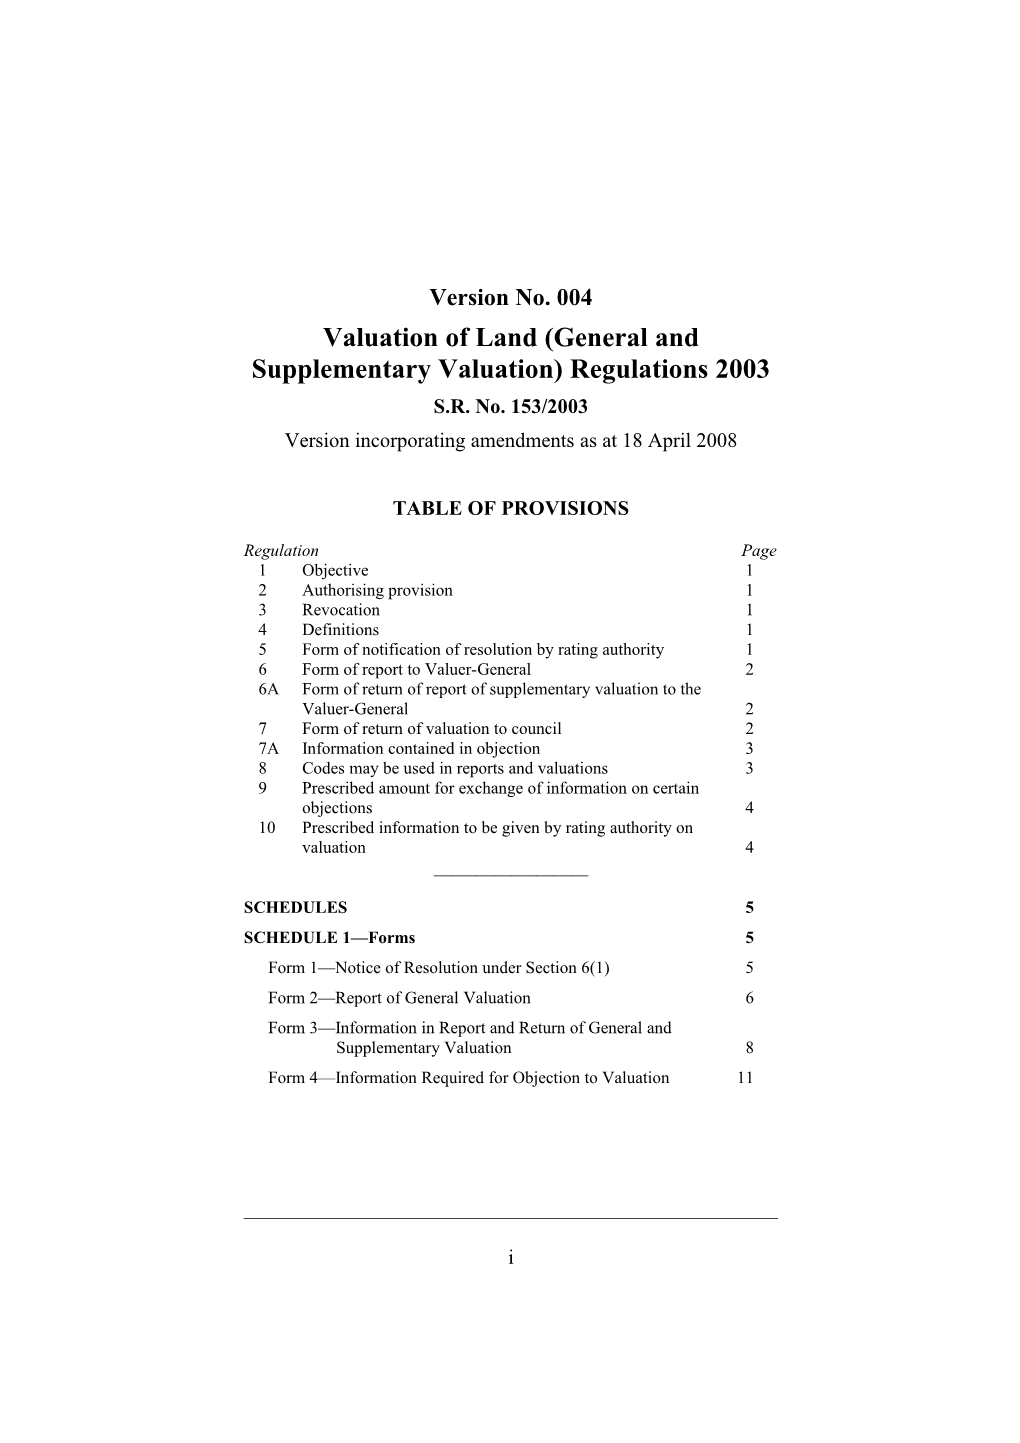 Valuation of Land (General and Supplementary Valuation) Regulations 2003